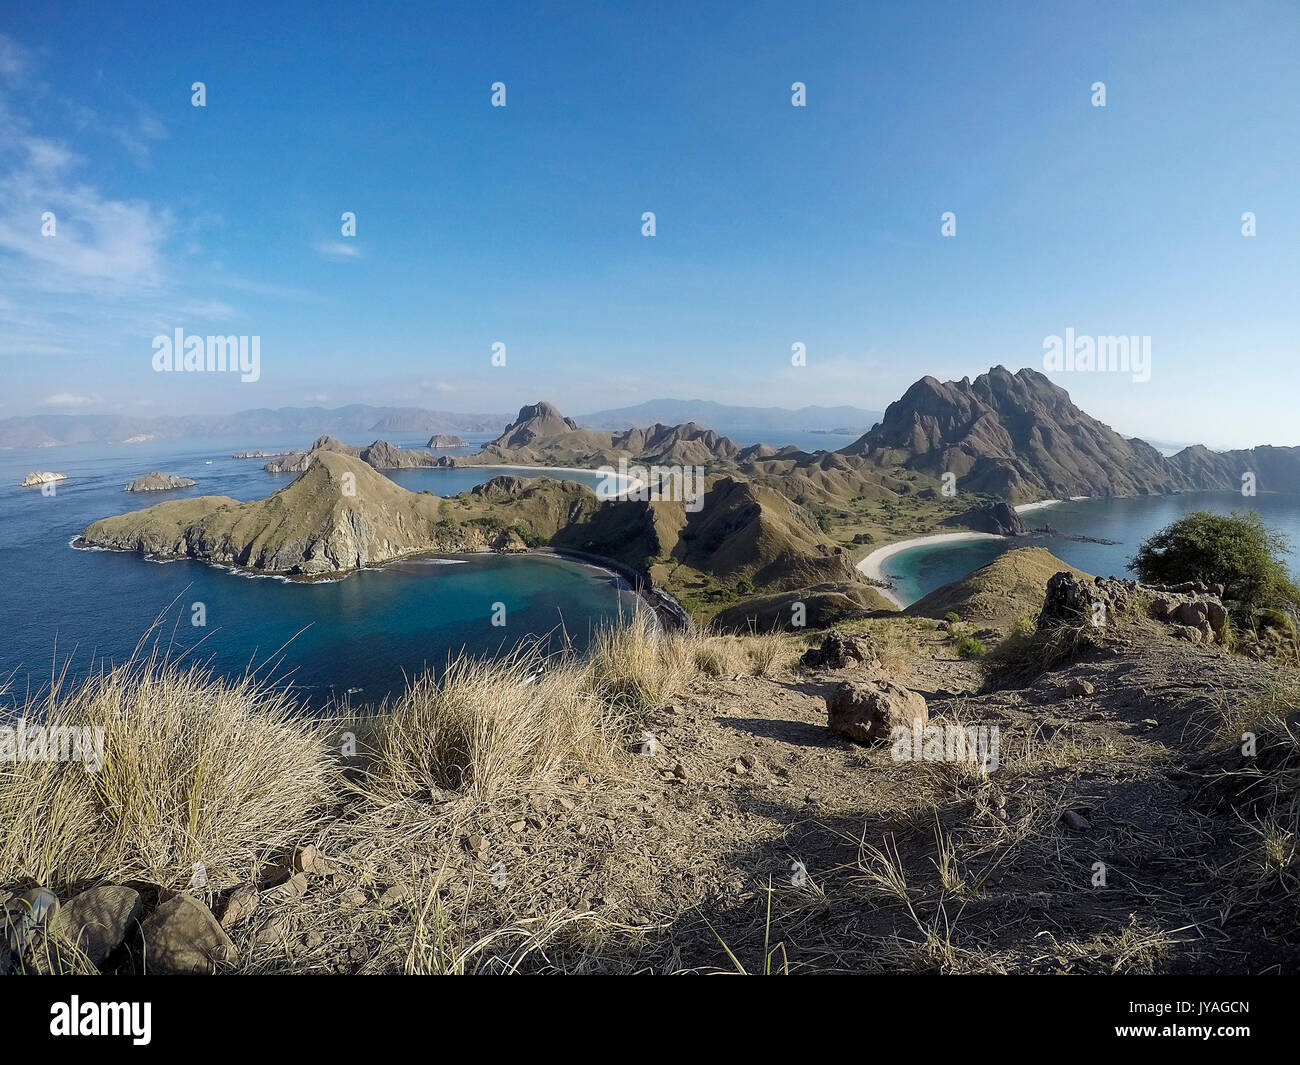 Padar Island with scenic high view of three beautiful white sandy beaches surrounded by a wide ocean and part of komodo national park in Flores, Indon Stock Photo